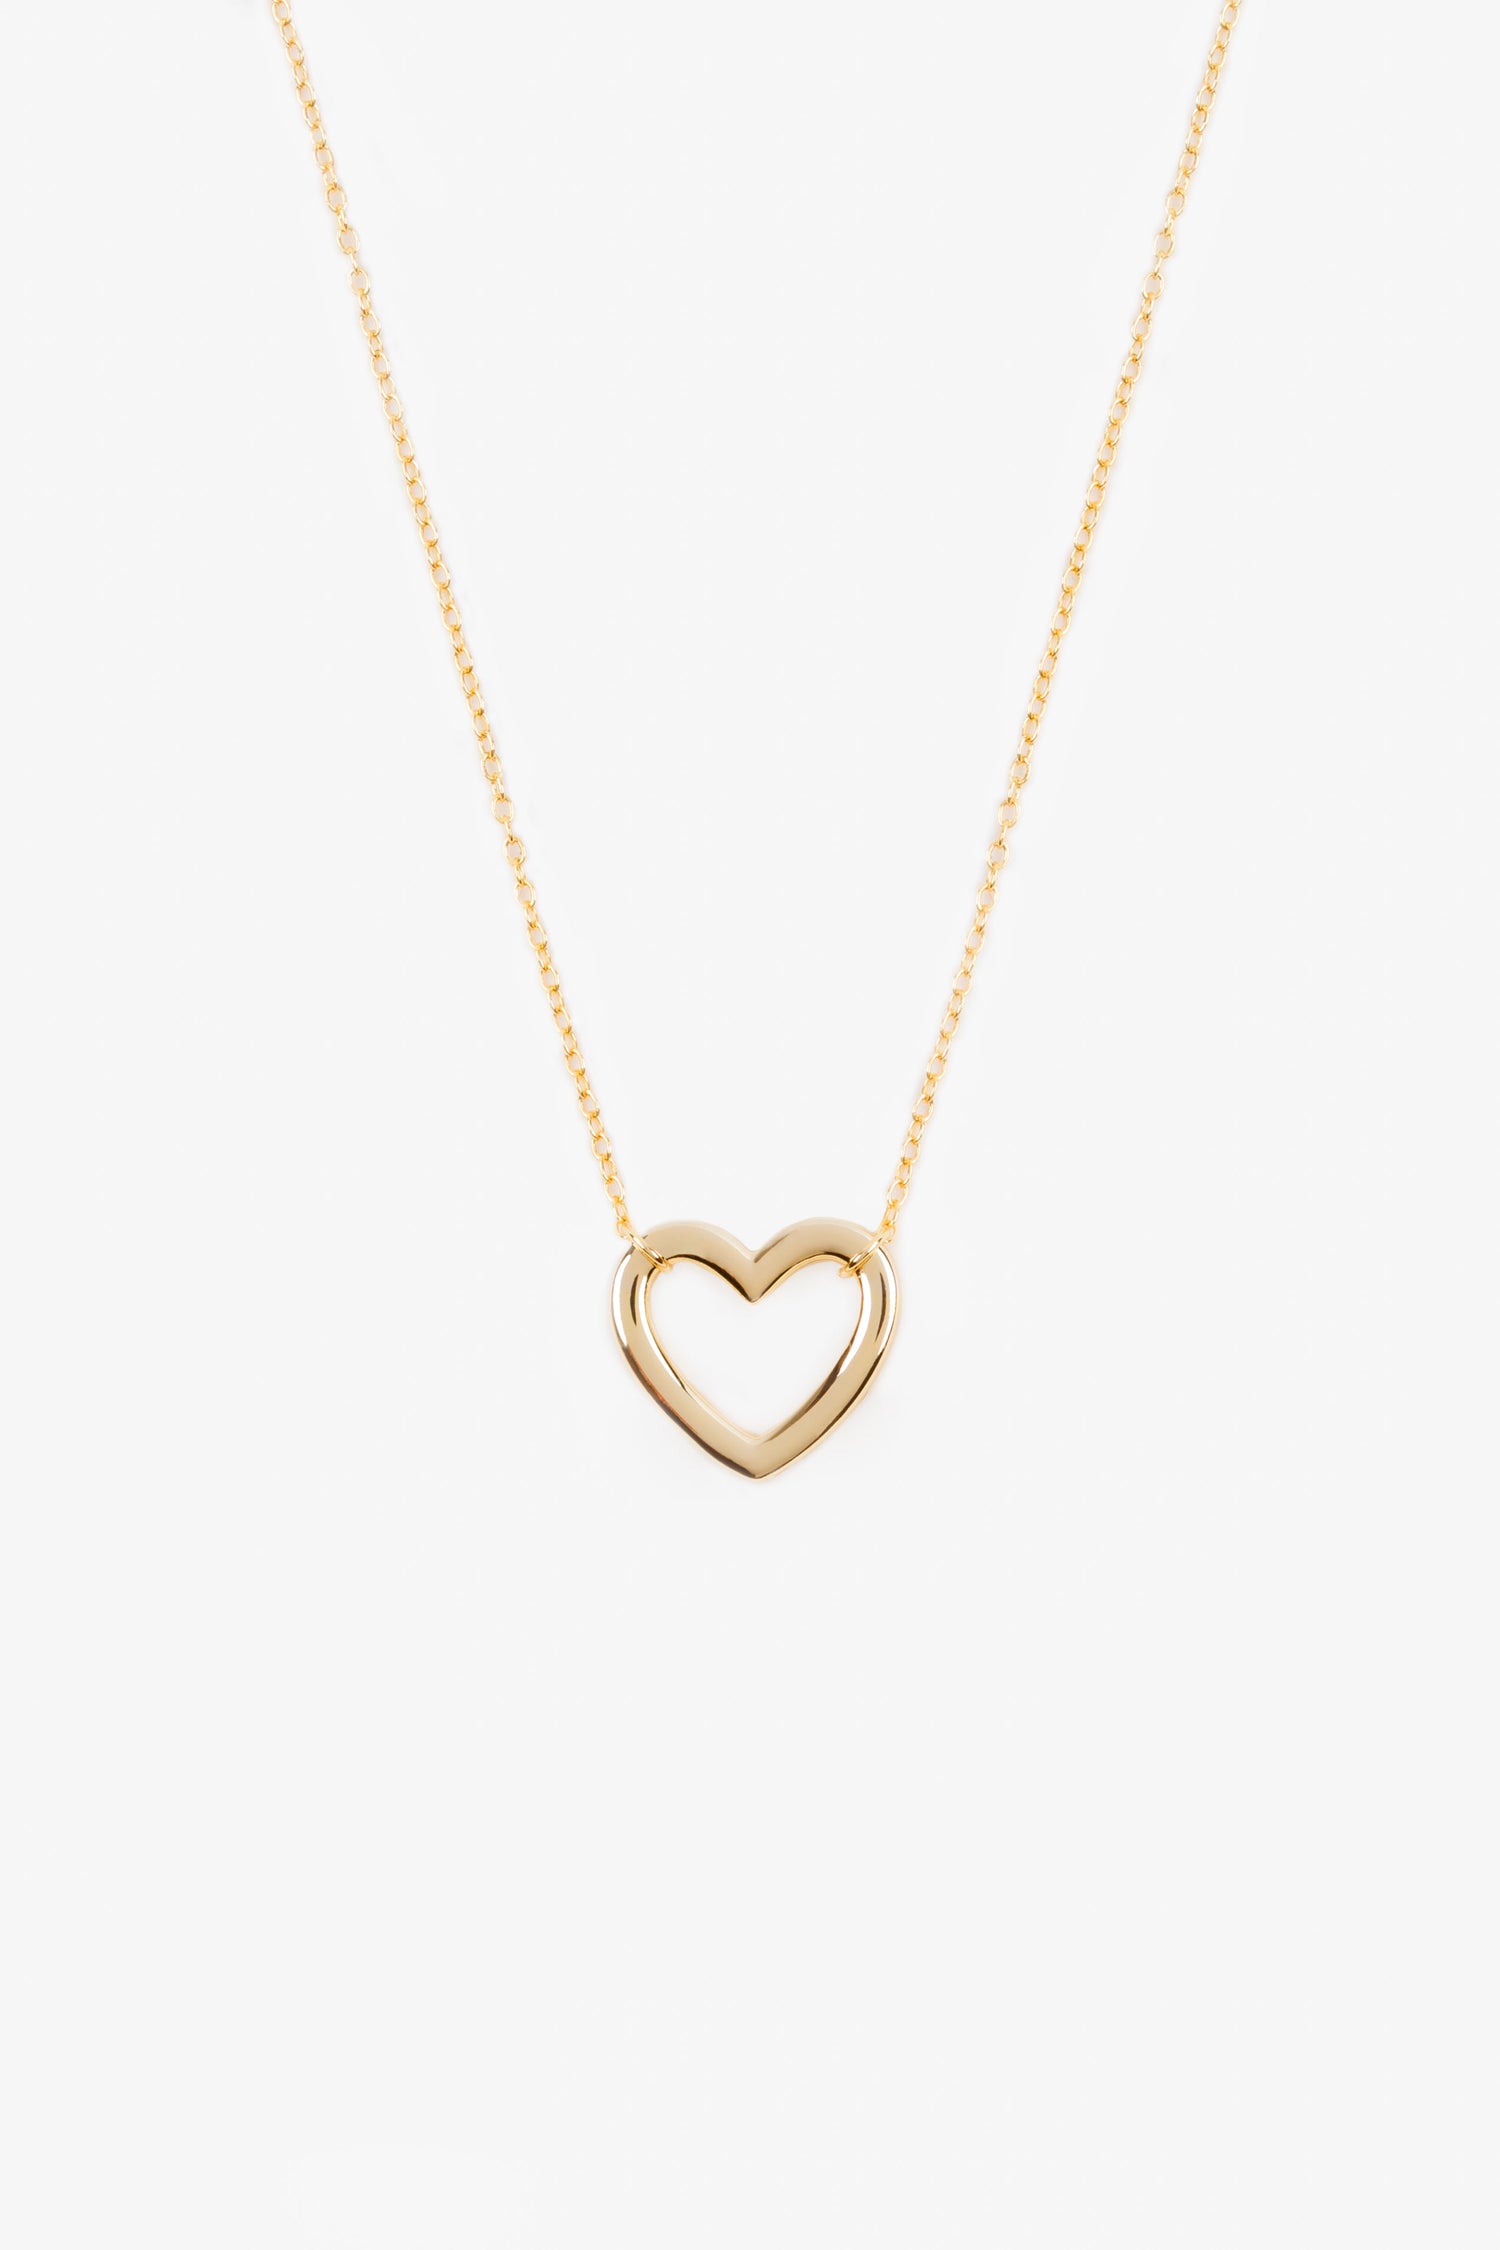 gold plated heart shaped pendant on a gold chain. necklace is on a white background